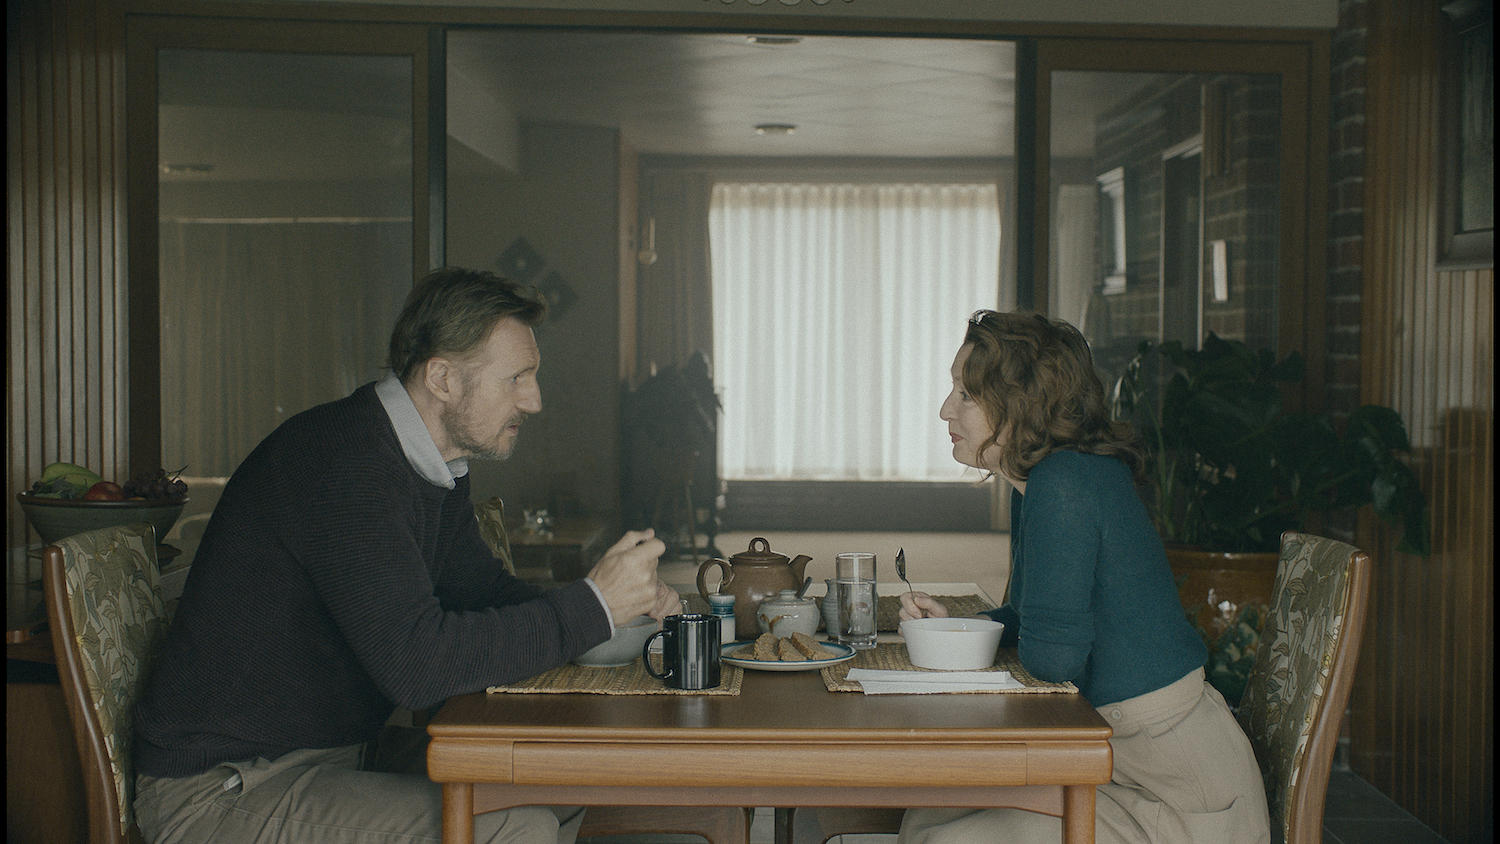  Liam Neeson and Lesley Manville in <em>Ordinary Love</em> (photo: Aidan Monaghan, courtesy of Bleecker Street)